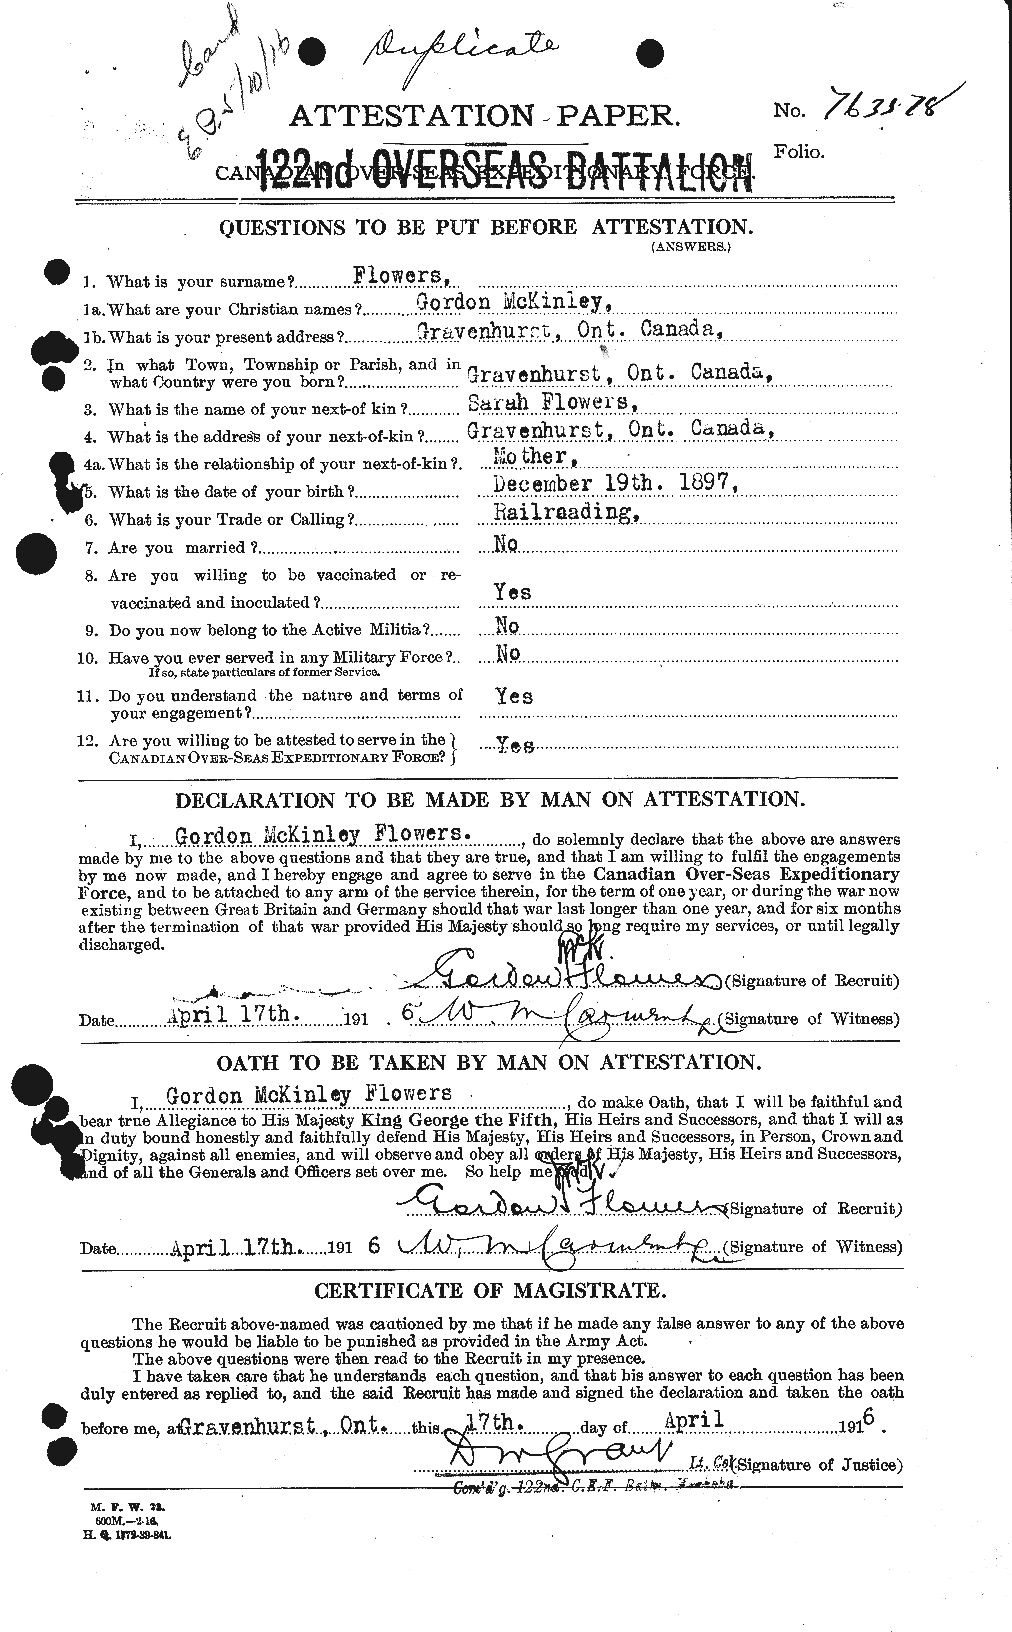 Personnel Records of the First World War - CEF 325430a